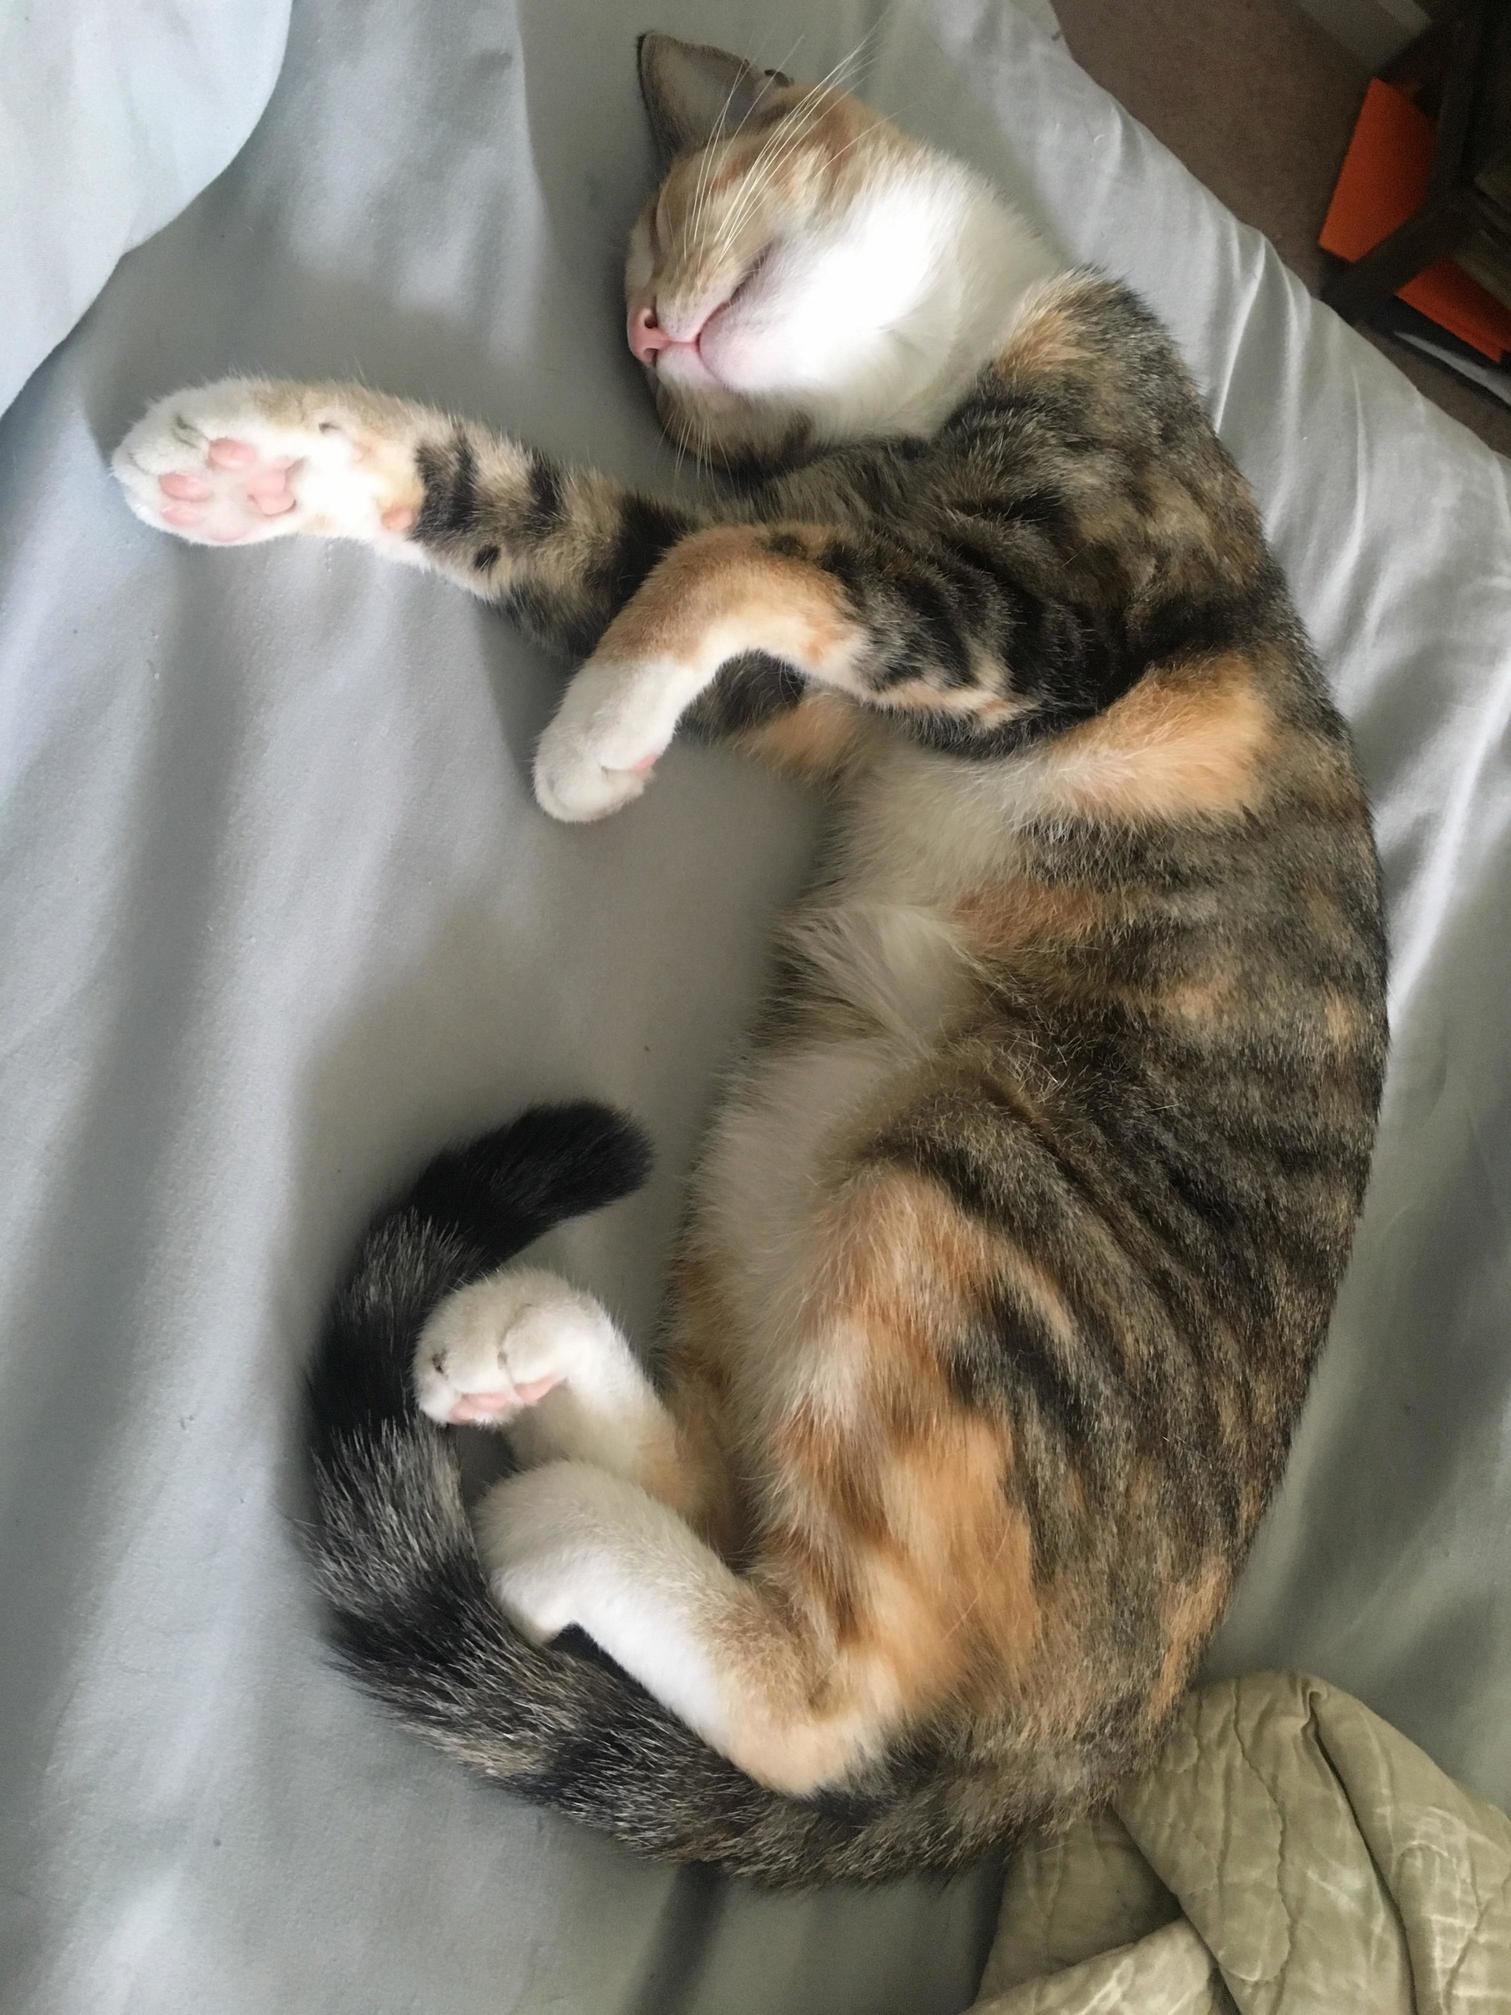 Rescued her almost a year ago… had some burnt beans and a scratch on her lip from being on the highway mid july. now shes the most spoiled baby